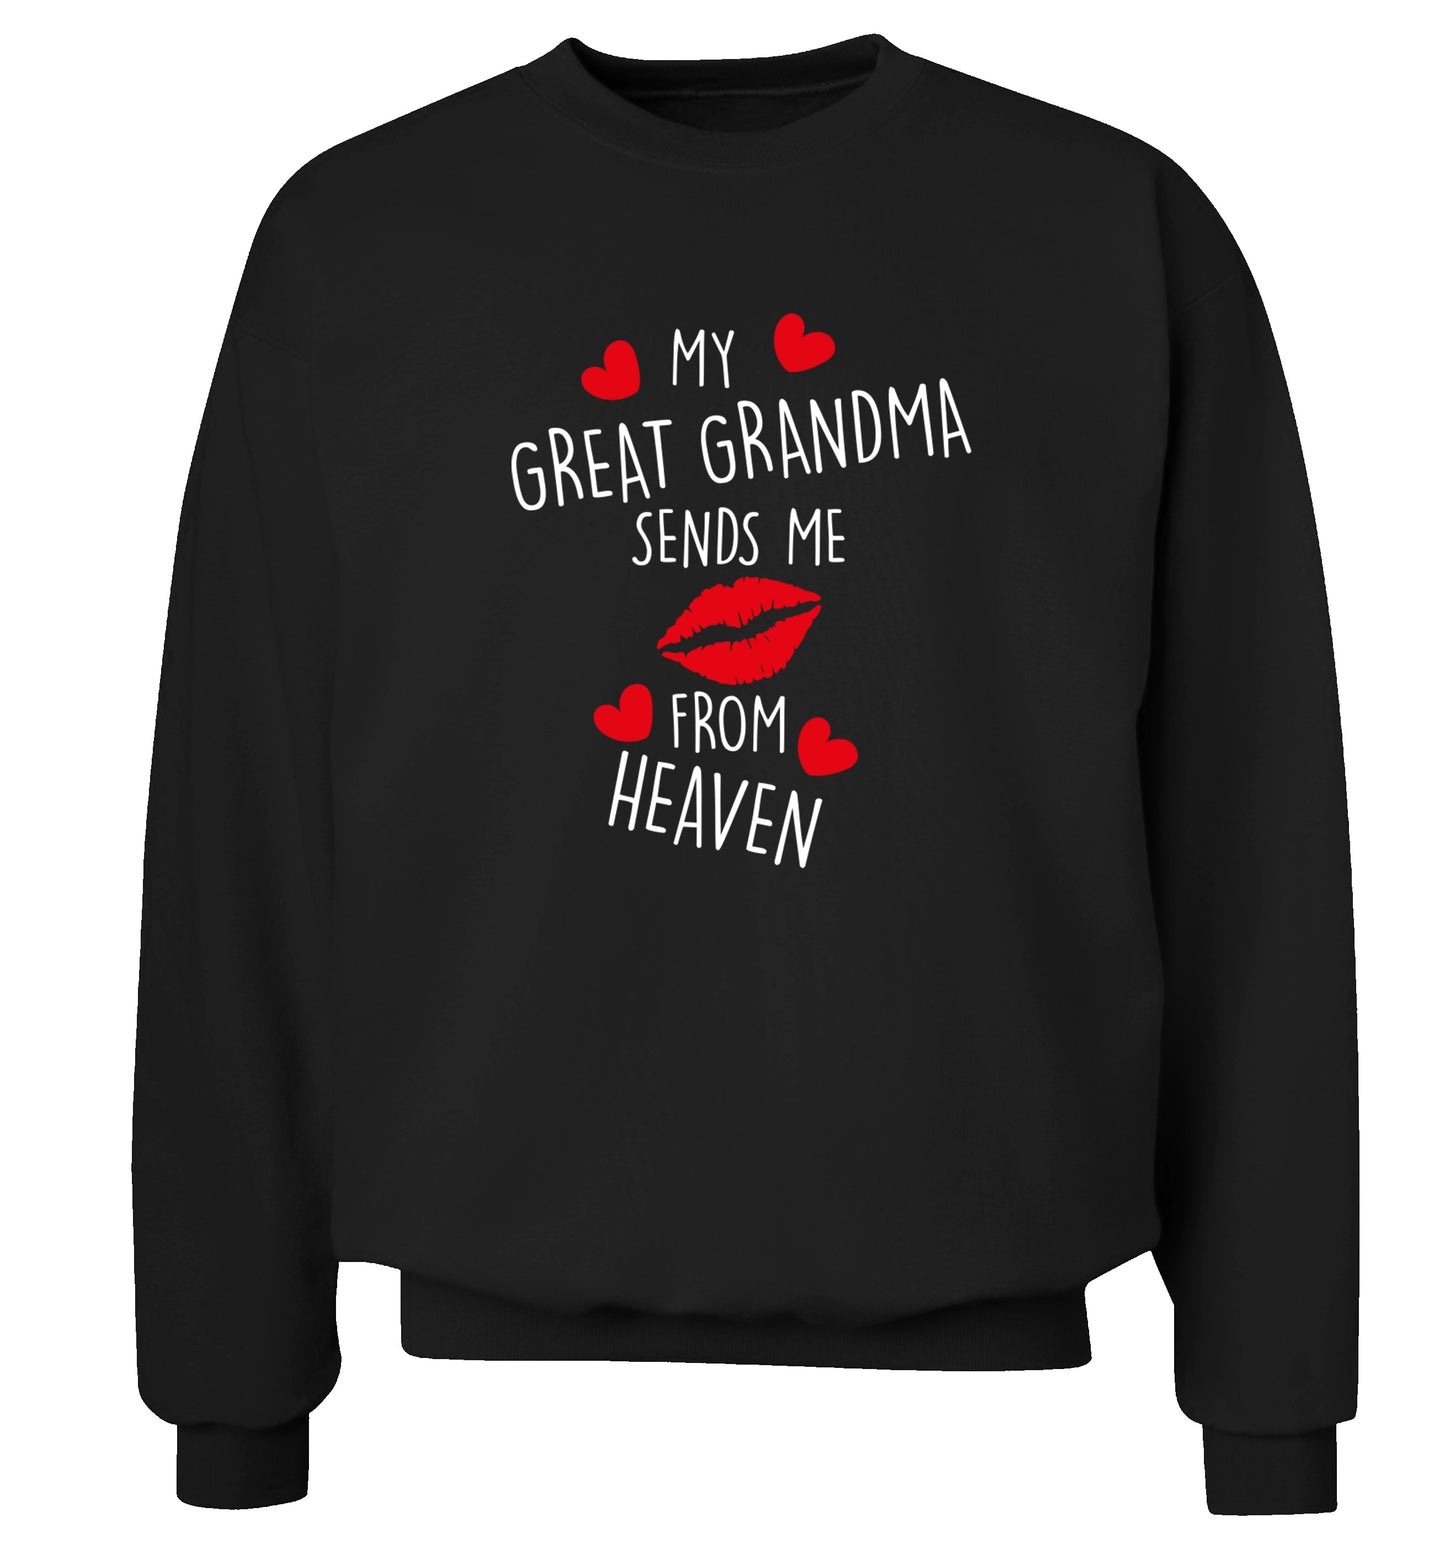 My great grandma sends me kisses from heaven Adult's unisex black Sweater 2XL